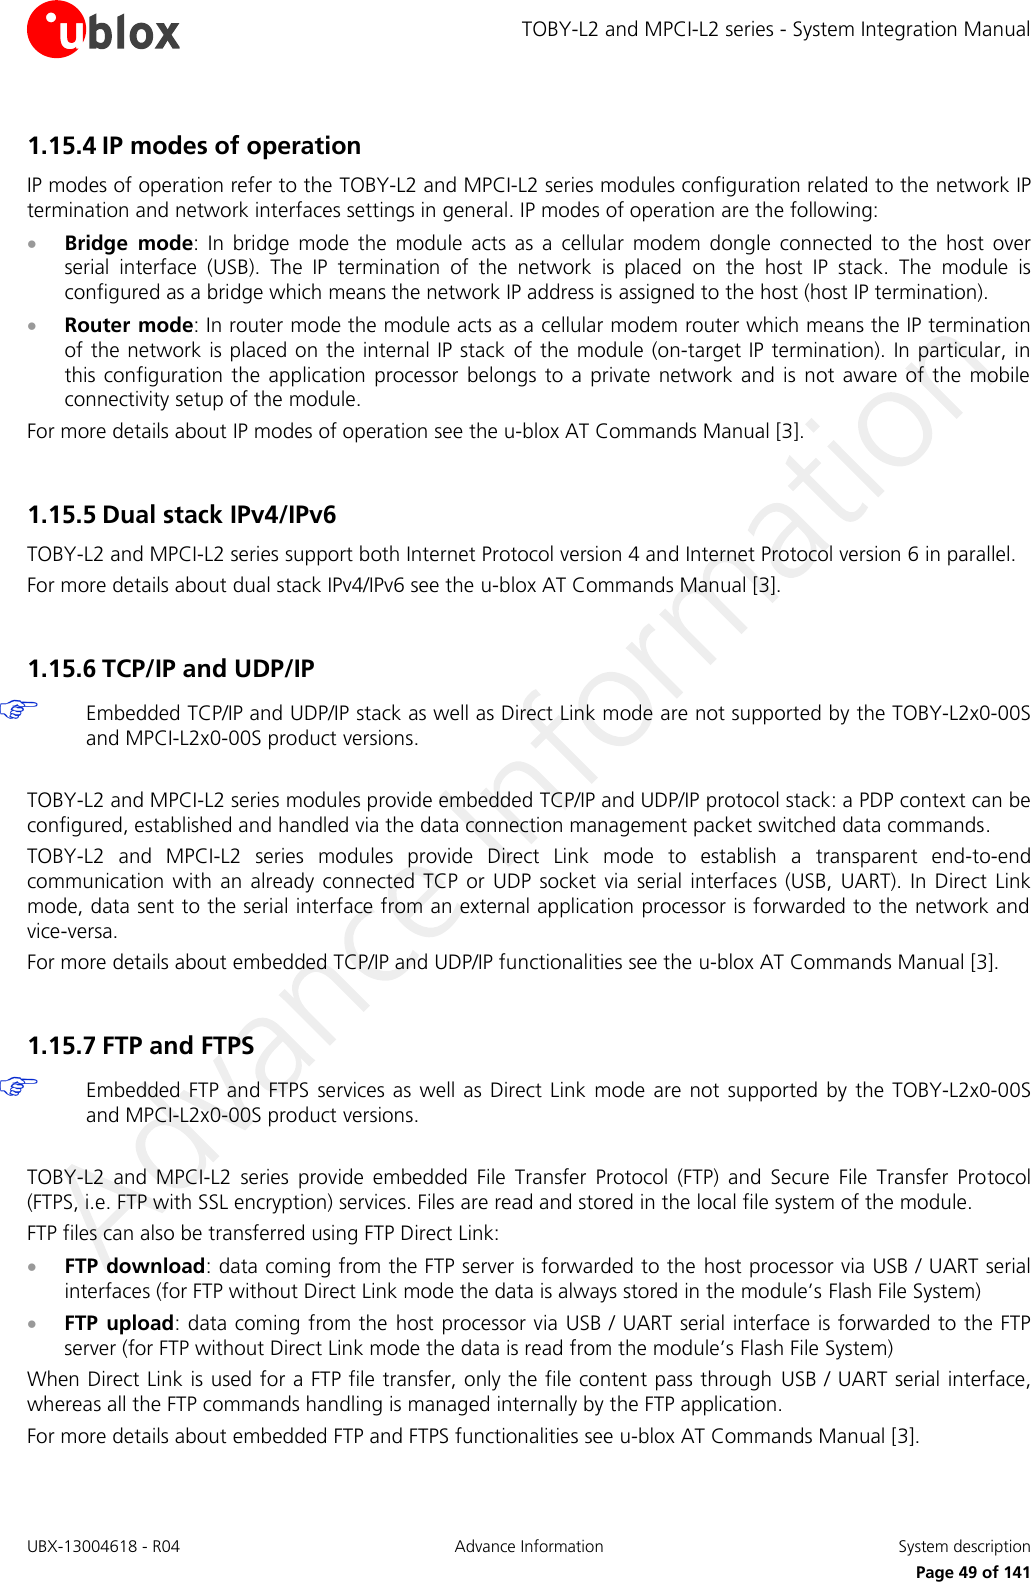 TOBY-L2 and MPCI-L2 series - System Integration Manual UBX-13004618 - R04  Advance Information  System description     Page 49 of 141 1.15.4 IP modes of operation IP modes of operation refer to the TOBY-L2 and MPCI-L2 series modules configuration related to the network IP termination and network interfaces settings in general. IP modes of operation are the following:  Bridge  mode:  In  bridge  mode  the  module  acts  as  a  cellular  modem  dongle  connected  to  the  host  over serial  interface  (USB).  The  IP  termination  of  the  network  is  placed  on  the  host  IP  stack.  The  module  is configured as a bridge which means the network IP address is assigned to the host (host IP termination).   Router mode: In router mode the module acts as a cellular modem router which means the IP termination of the network is placed on the internal IP stack of the module (on-target IP termination). In particular, in this  configuration the  application  processor  belongs to  a  private  network and  is  not  aware  of  the  mobile connectivity setup of the module. For more details about IP modes of operation see the u-blox AT Commands Manual [3].  1.15.5 Dual stack IPv4/IPv6 TOBY-L2 and MPCI-L2 series support both Internet Protocol version 4 and Internet Protocol version 6 in parallel. For more details about dual stack IPv4/IPv6 see the u-blox AT Commands Manual [3].  1.15.6 TCP/IP and UDP/IP  Embedded TCP/IP and UDP/IP stack as well as Direct Link mode are not supported by the TOBY-L2x0-00S and MPCI-L2x0-00S product versions.  TOBY-L2 and MPCI-L2 series modules provide embedded TCP/IP and UDP/IP protocol stack: a PDP context can be configured, established and handled via the data connection management packet switched data commands.  TOBY-L2  and  MPCI-L2  series  modules  provide  Direct  Link  mode  to  establish  a  transparent  end-to-end communication  with an  already  connected  TCP  or UDP  socket via  serial  interfaces (USB,  UART).  In  Direct  Link mode, data sent to the serial interface from an external application processor is forwarded to the network and vice-versa. For more details about embedded TCP/IP and UDP/IP functionalities see the u-blox AT Commands Manual [3].  1.15.7 FTP and FTPS  Embedded FTP and FTPS  services  as  well  as  Direct  Link mode  are not supported  by the TOBY-L2x0-00S and MPCI-L2x0-00S product versions.  TOBY-L2  and  MPCI-L2  series  provide  embedded  File  Transfer  Protocol  (FTP)  and  Secure  File  Transfer  Protocol (FTPS, i.e. FTP with SSL encryption) services. Files are read and stored in the local file system of the module. FTP files can also be transferred using FTP Direct Link:  FTP download: data coming from the FTP server is forwarded to the host processor via USB / UART serial interfaces (for FTP without Direct Link mode the data is always stored in the module’s Flash File System)  FTP  upload: data coming from the host processor via USB / UART serial interface is forwarded to the FTP server (for FTP without Direct Link mode the data is read from the module’s Flash File System) When Direct Link is used for a FTP file transfer, only the file content pass through  USB / UART serial interface, whereas all the FTP commands handling is managed internally by the FTP application. For more details about embedded FTP and FTPS functionalities see u-blox AT Commands Manual [3].  